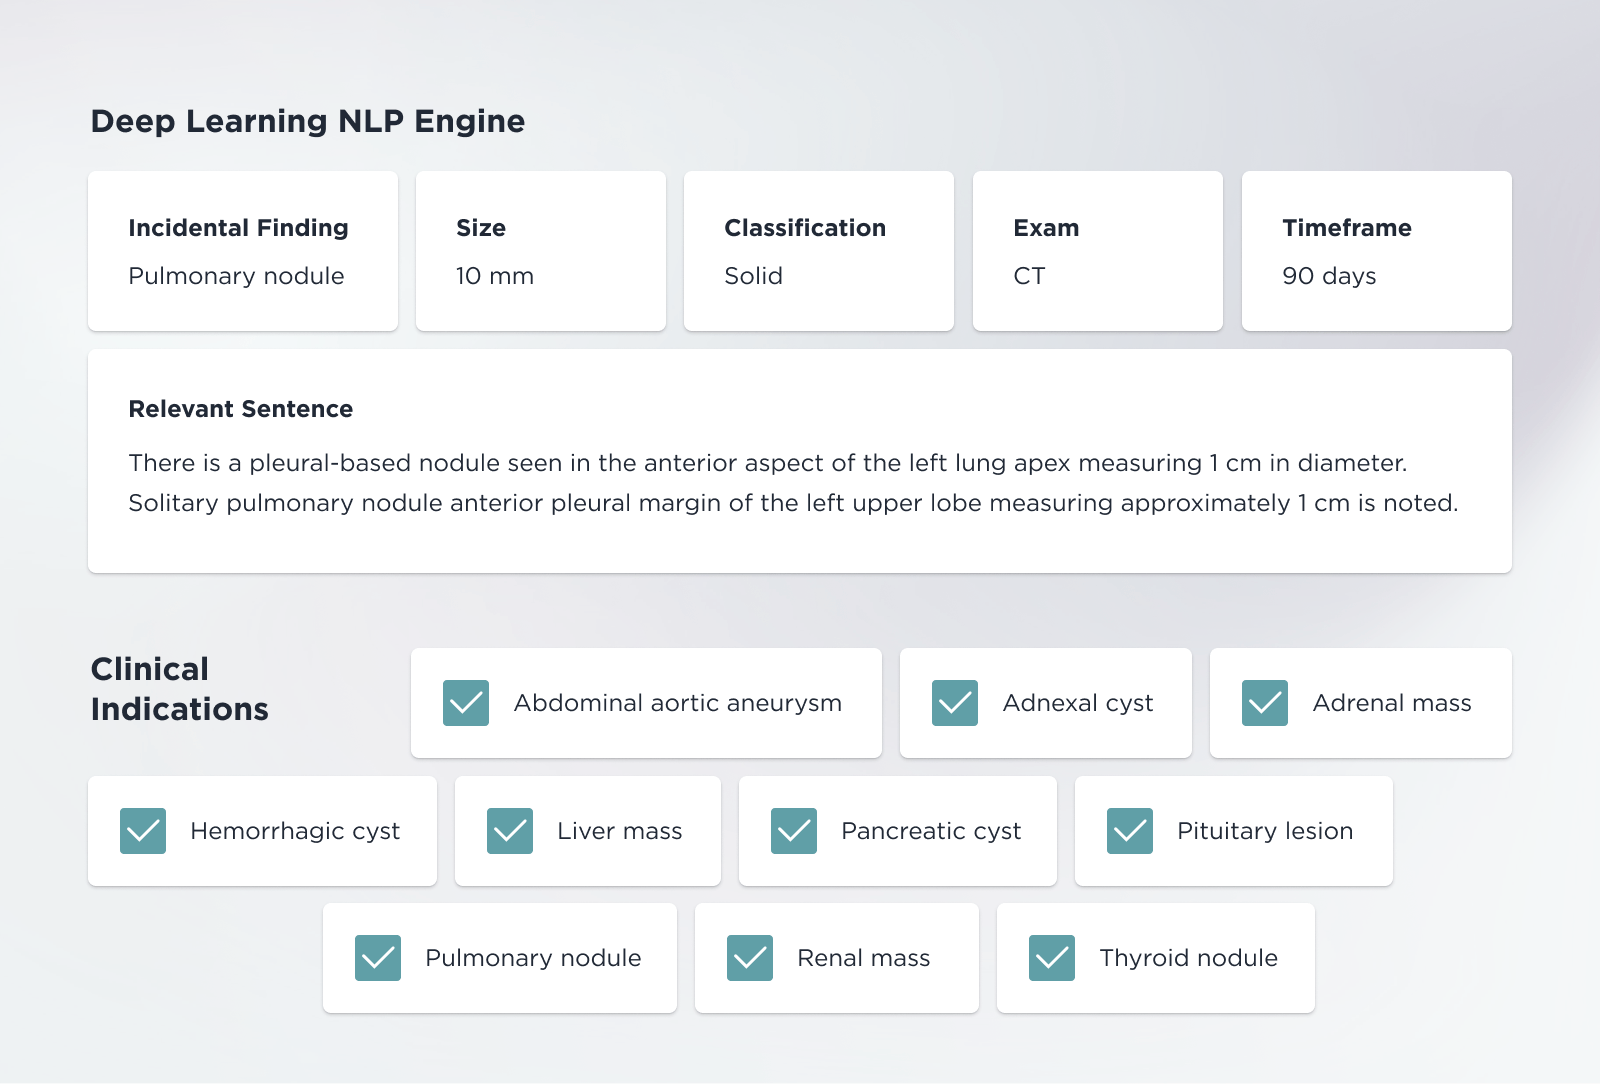 Examples of the clinical indications that the Inflo Health deep learning NLP engine extracts